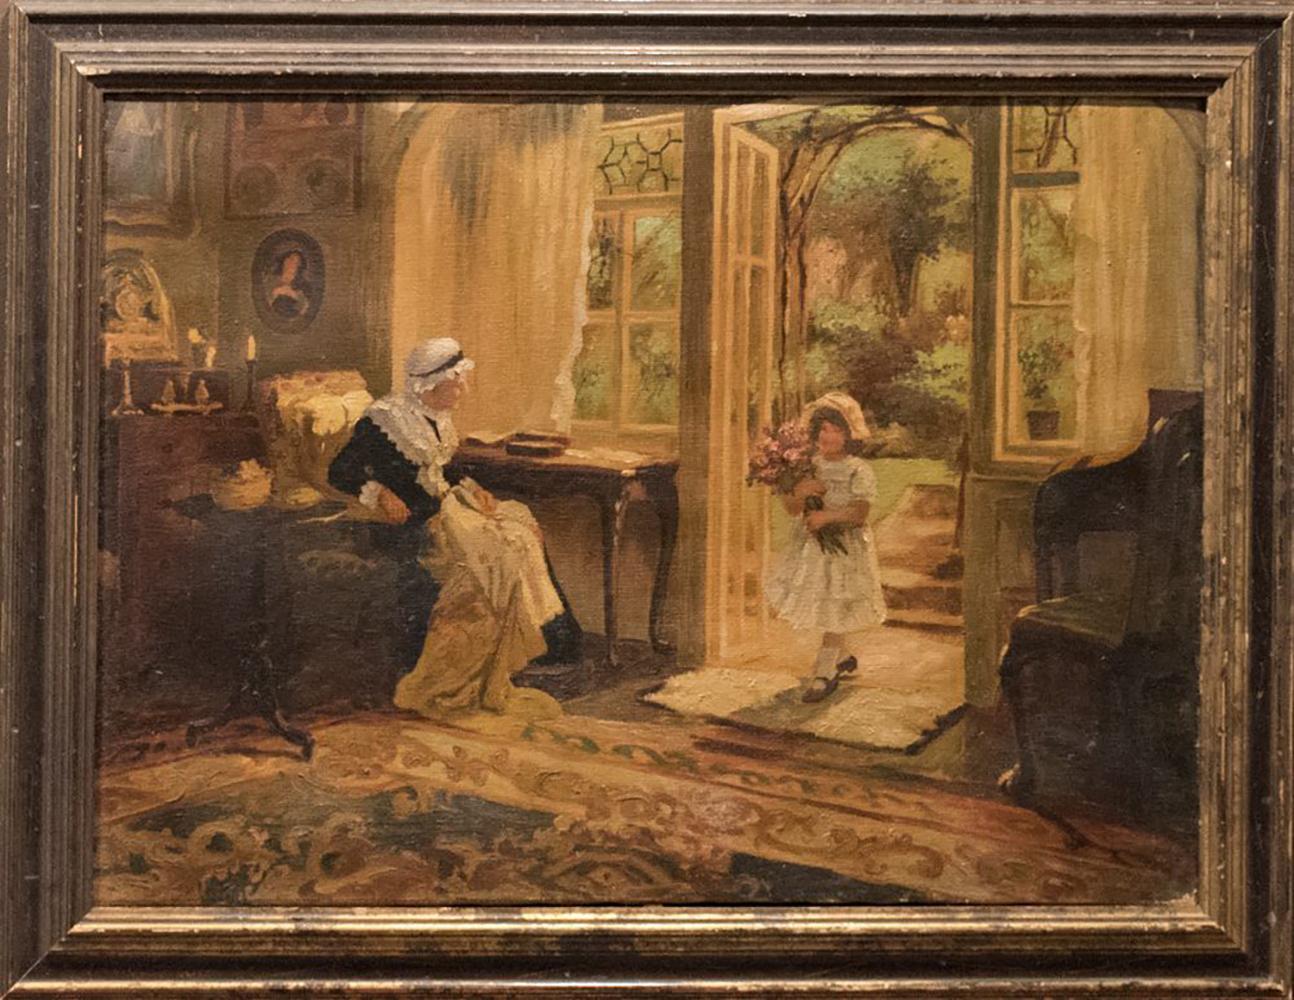 Unknown Figurative Painting - 19th Century Continental School “Flowers For Grandmother” Oil on Canvas